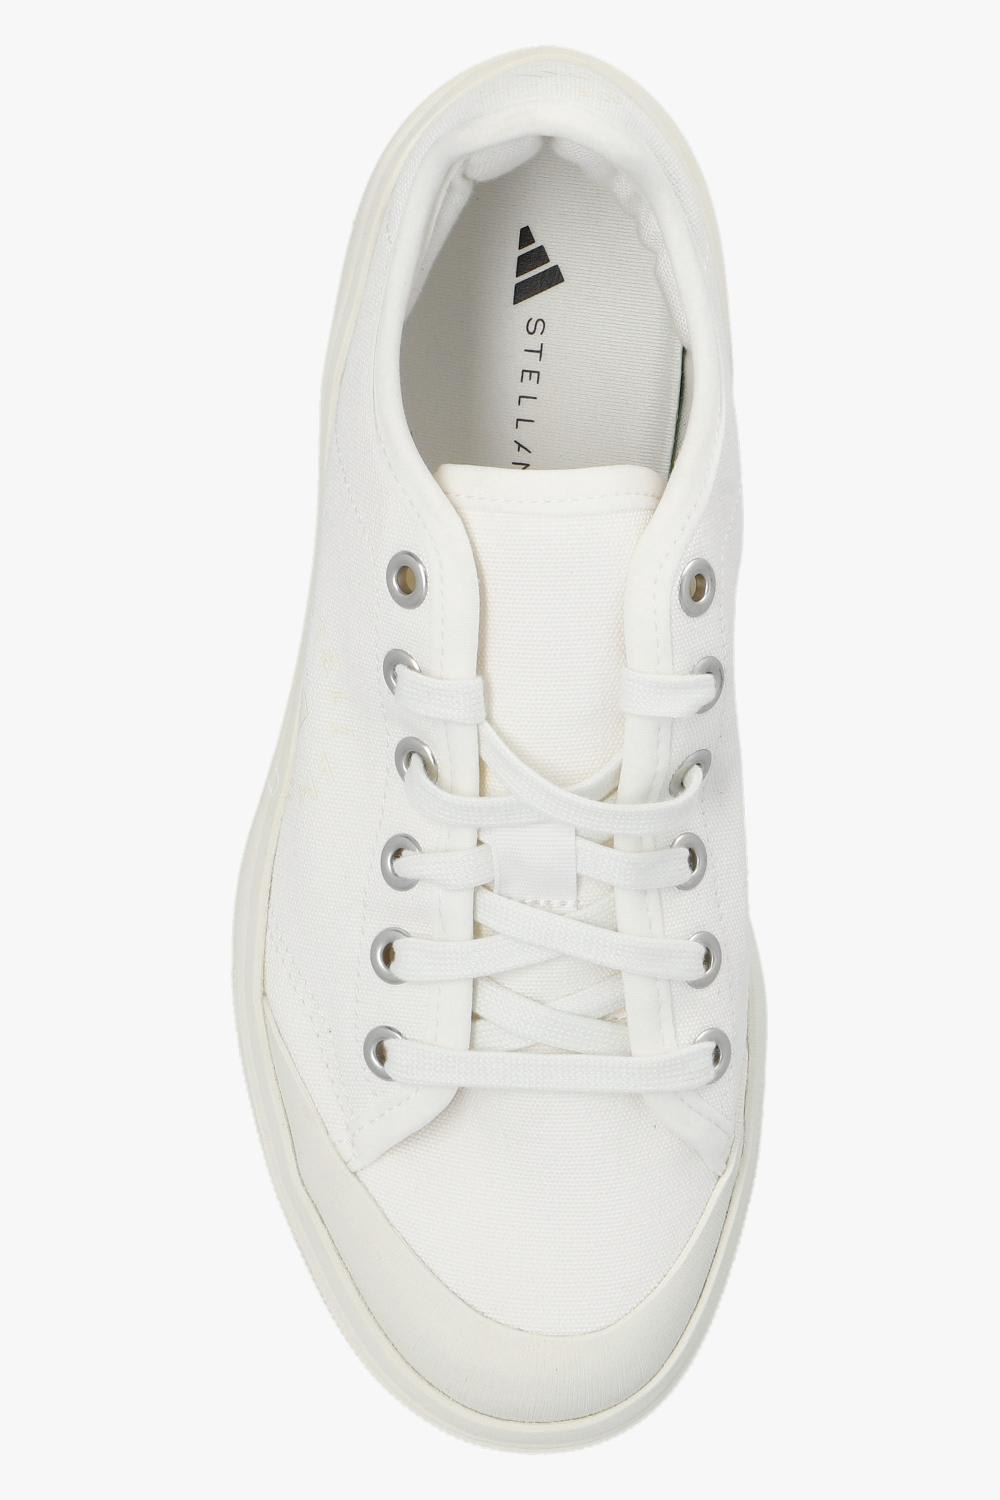 Shop Adidas By Stella Mccartney Court Sneakers